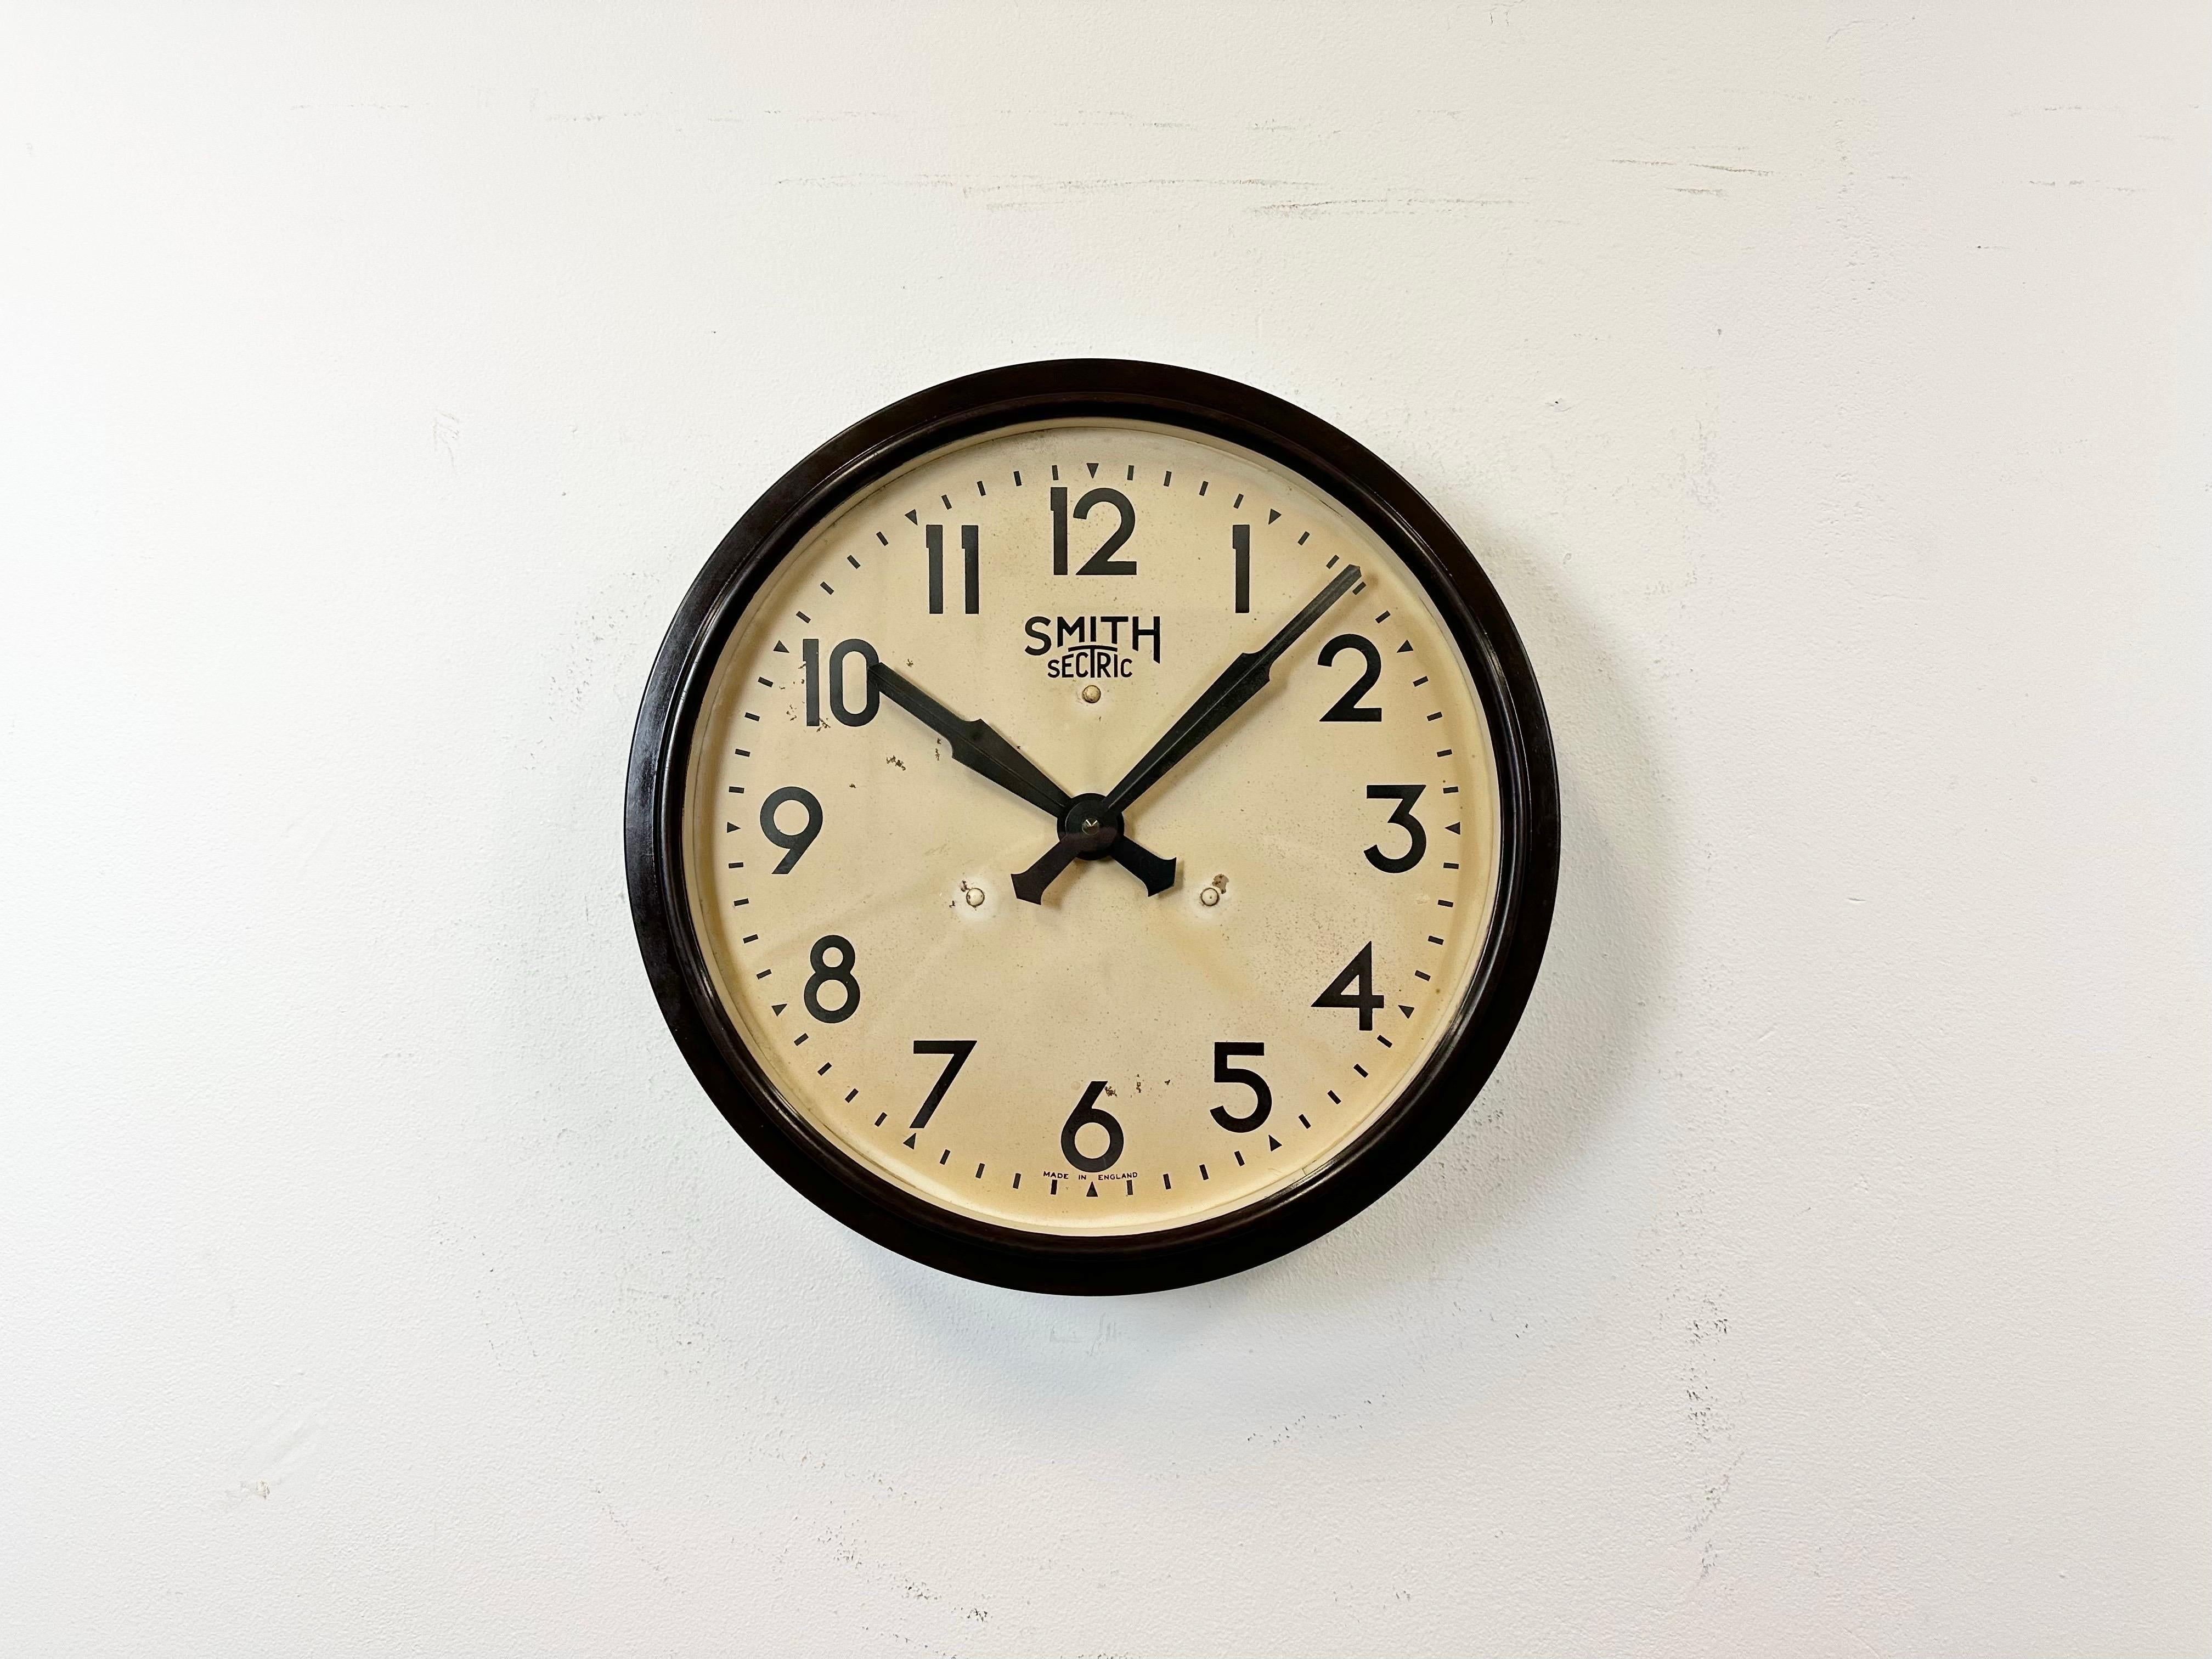 This wall clock was produced by Smith Sectric in England during the 1950s. It features a brown bakelite frame, an iron dial, an aluminium hands and a clear glass cover. The piece has been converted into a battery-powered clockwork and requires only